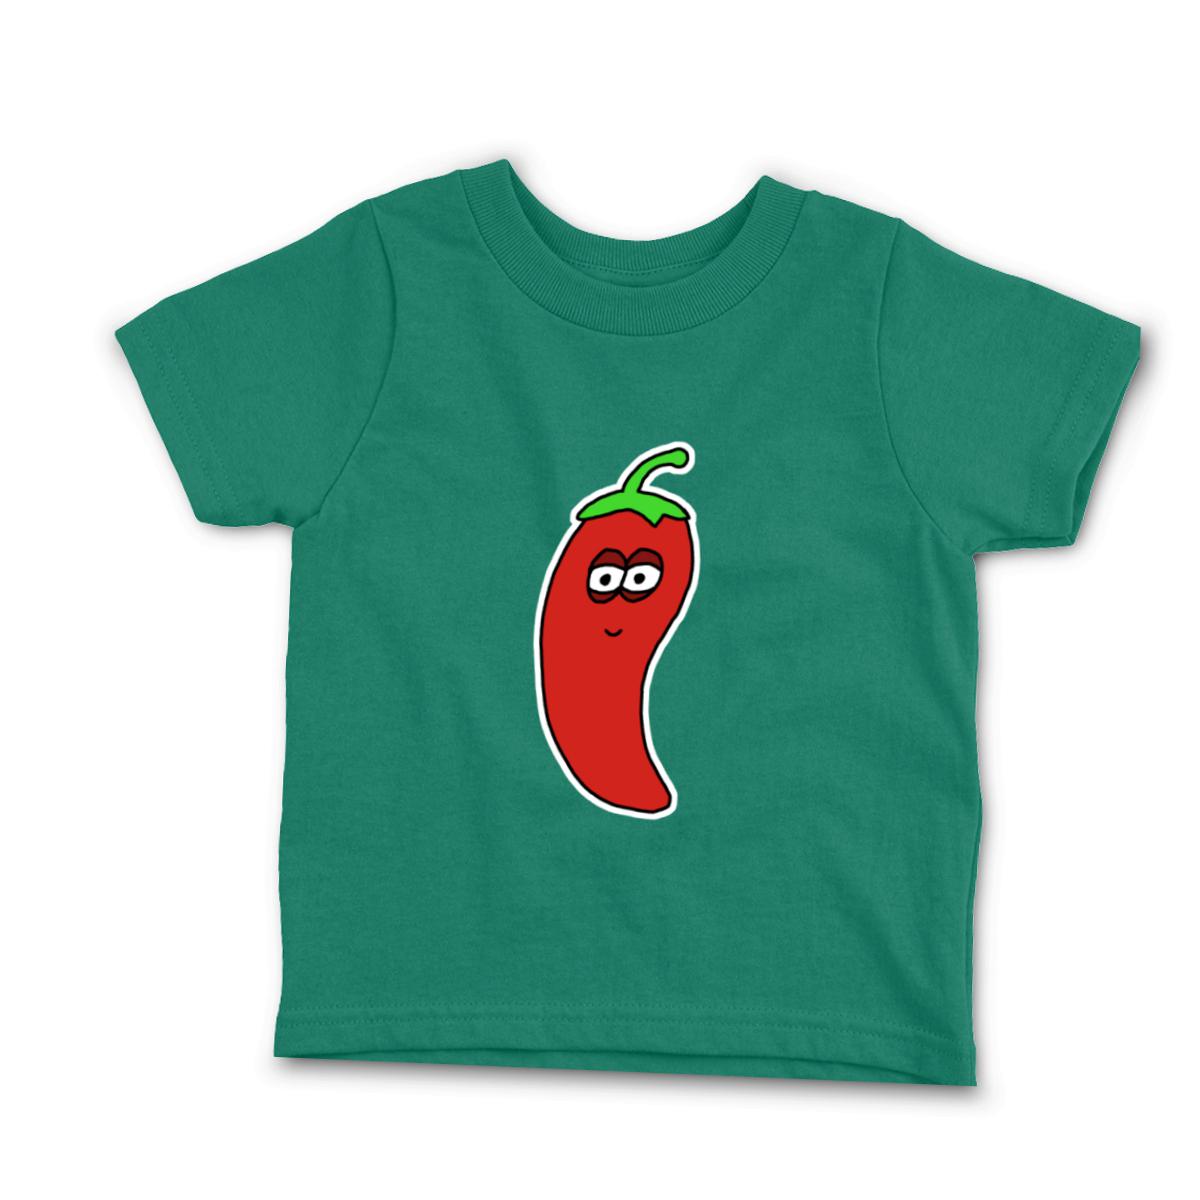 Chili Pepper Toddler Tee 2T kelly